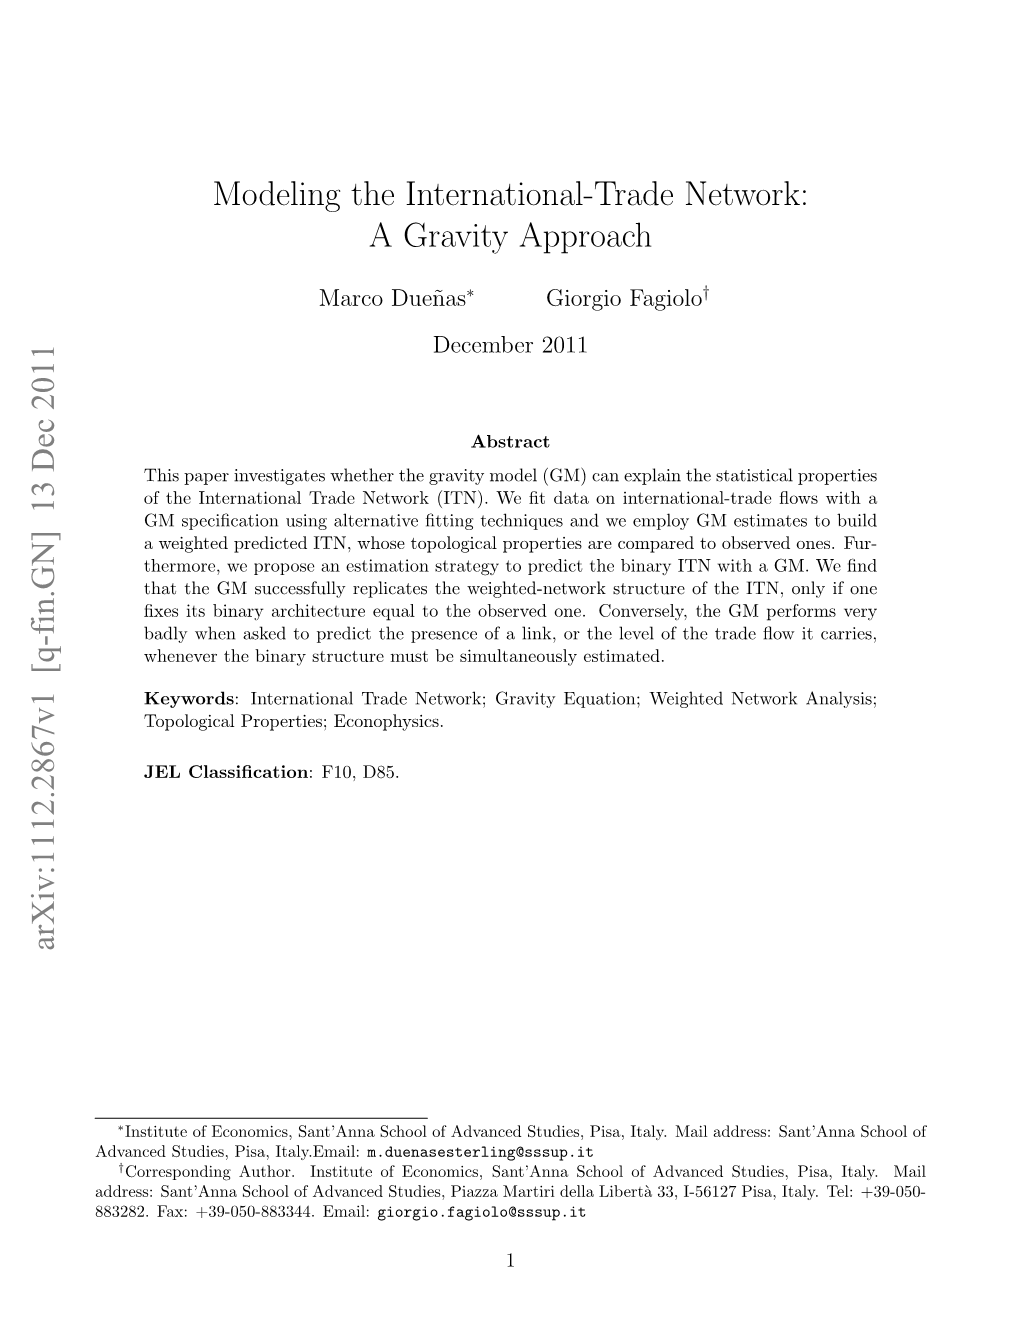 Modeling the International-Trade Network: a Gravity Approach